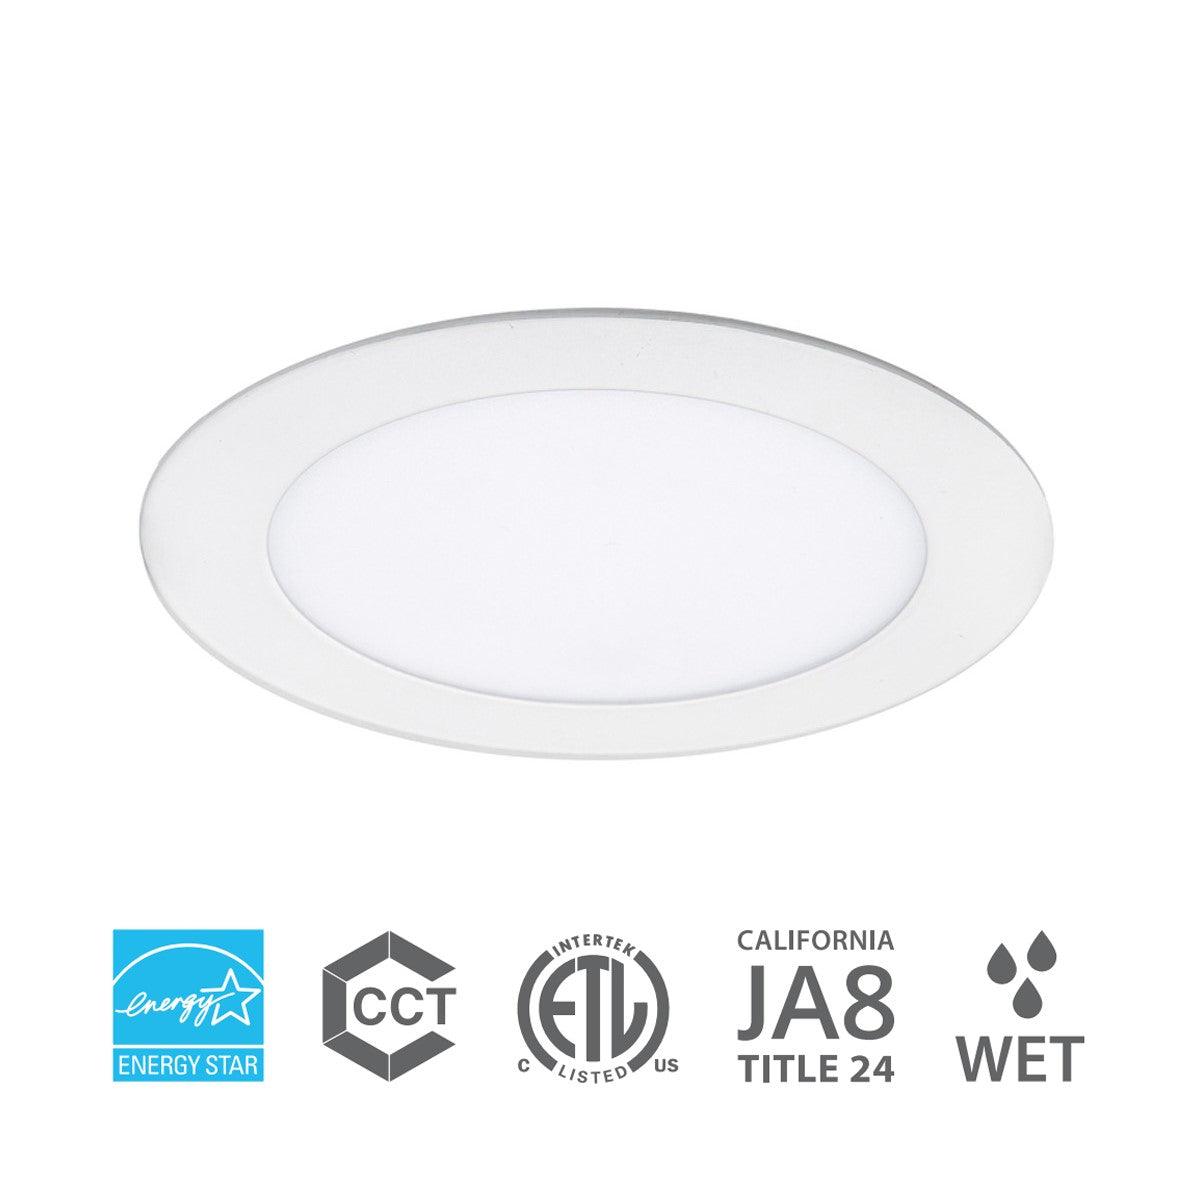 6 In. Wafer-Thin Lotos LED Canless LED Recessed Light, 12 Watt, 1200 Lumens, Selectable CCT, 2700K to 5000K, 120/277V - Bees Lighting